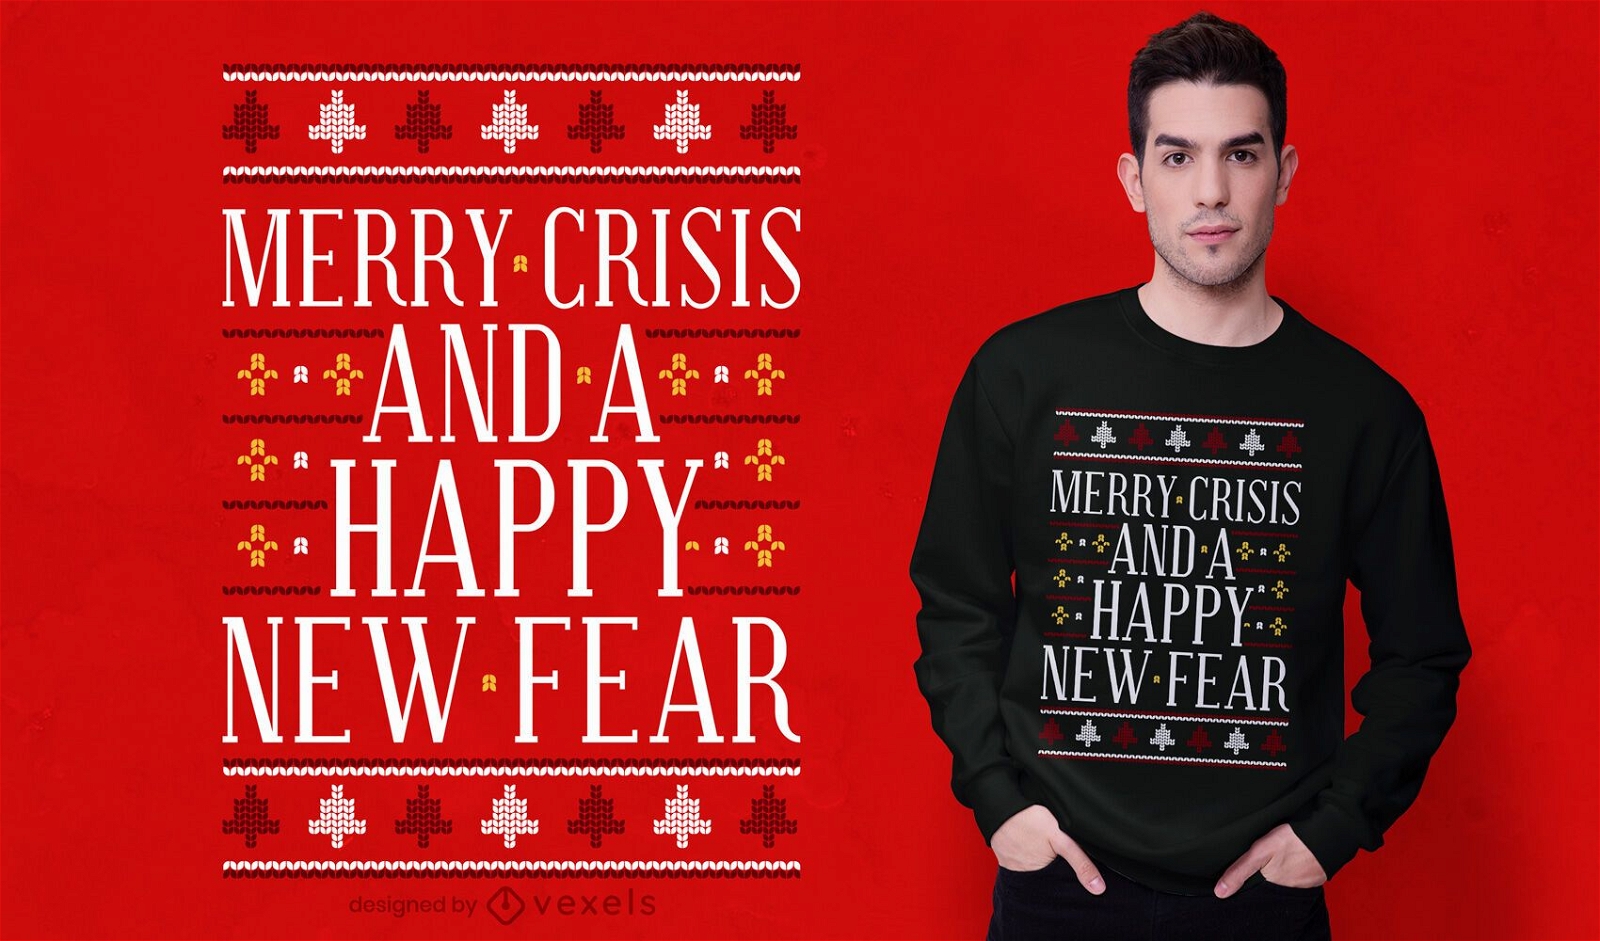 Merry crisis ugly sweater t-shirt design